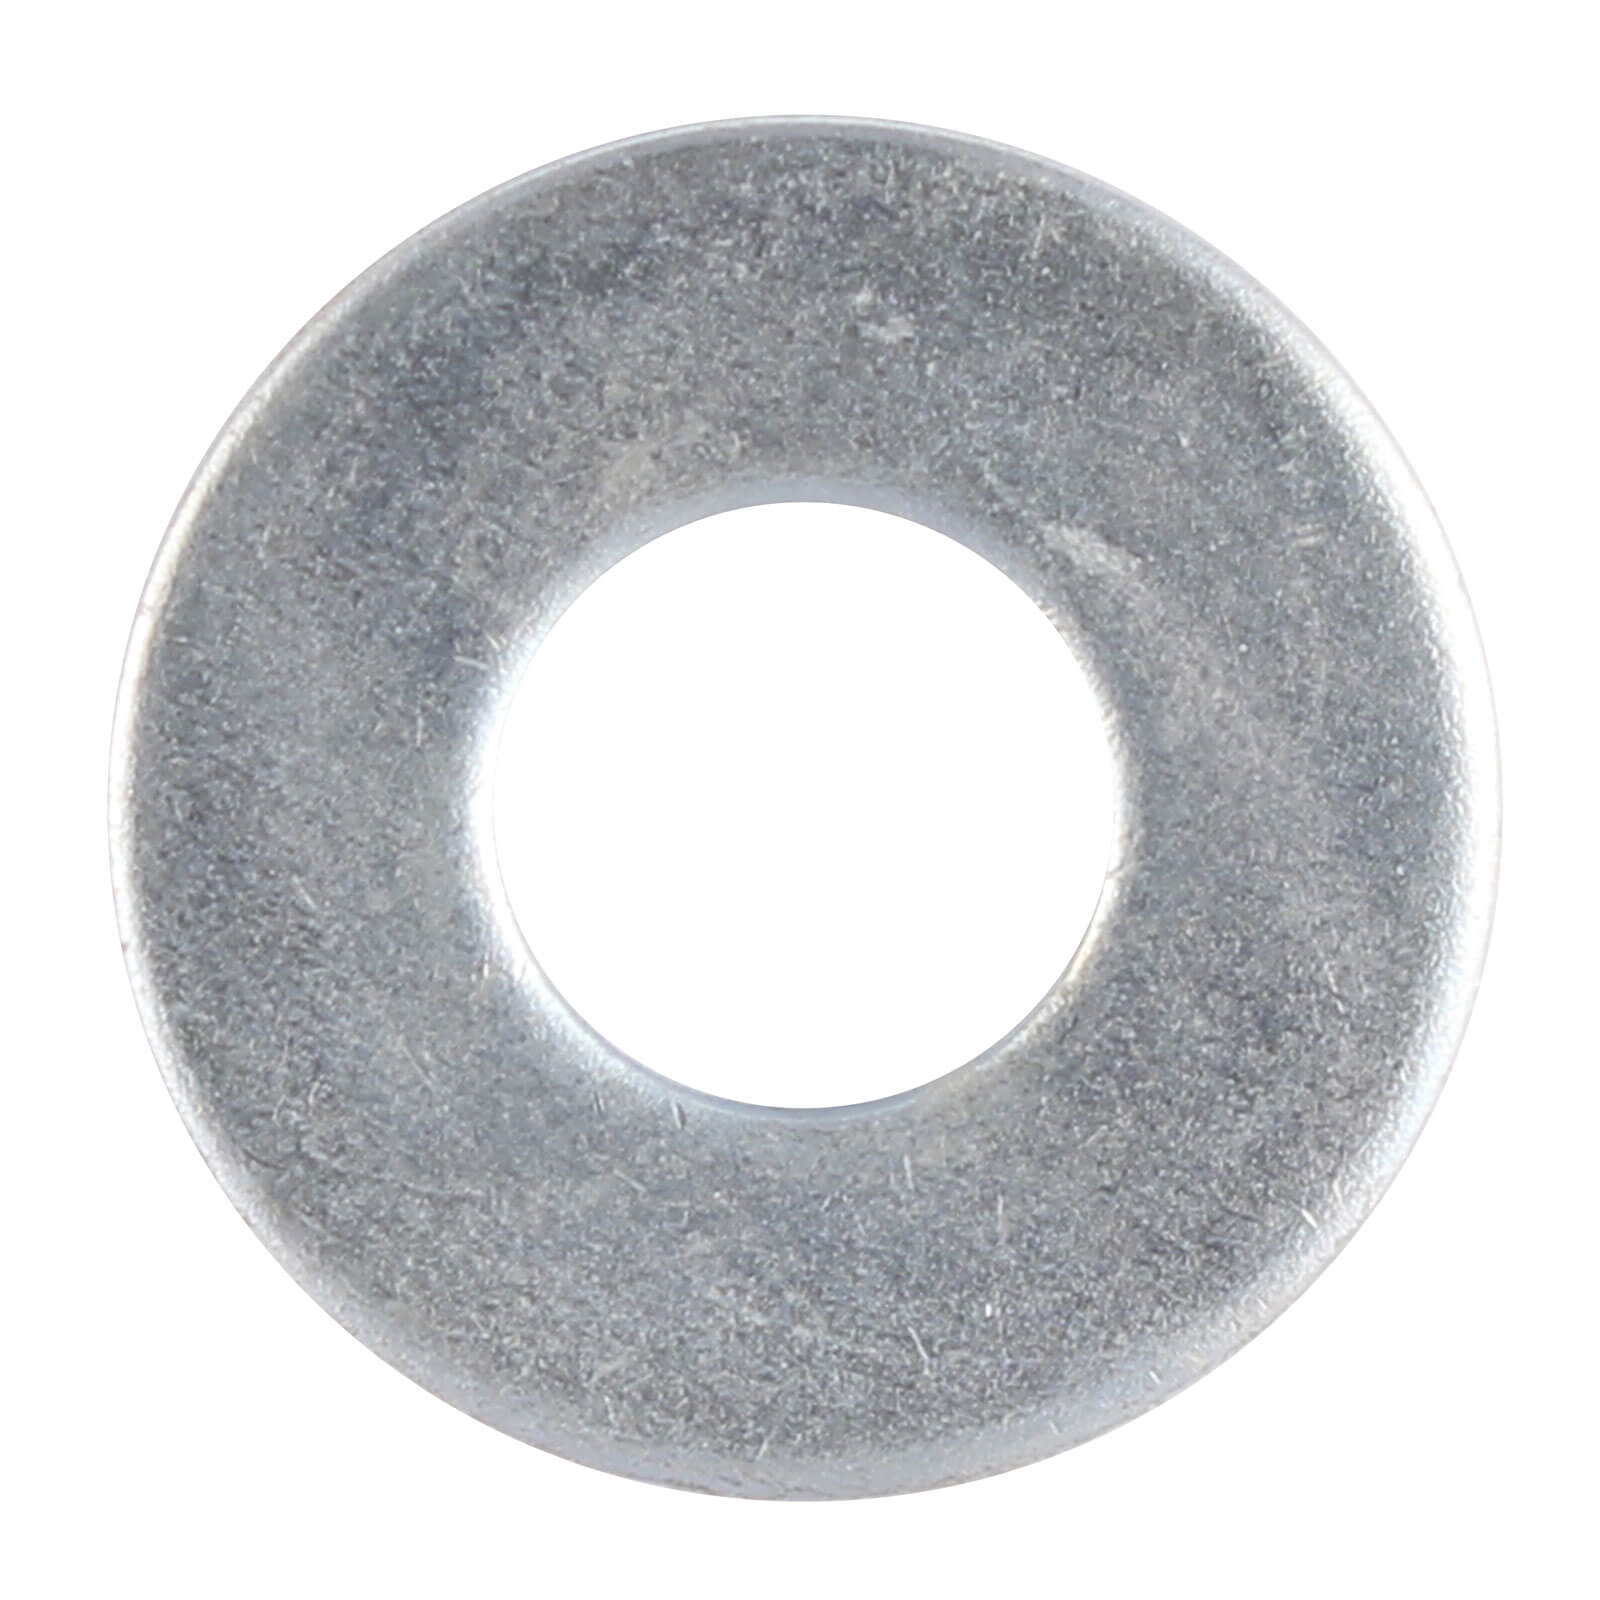 Image of Steel Washers Zinc Plated 6mm 12.5mm Pack of 20000